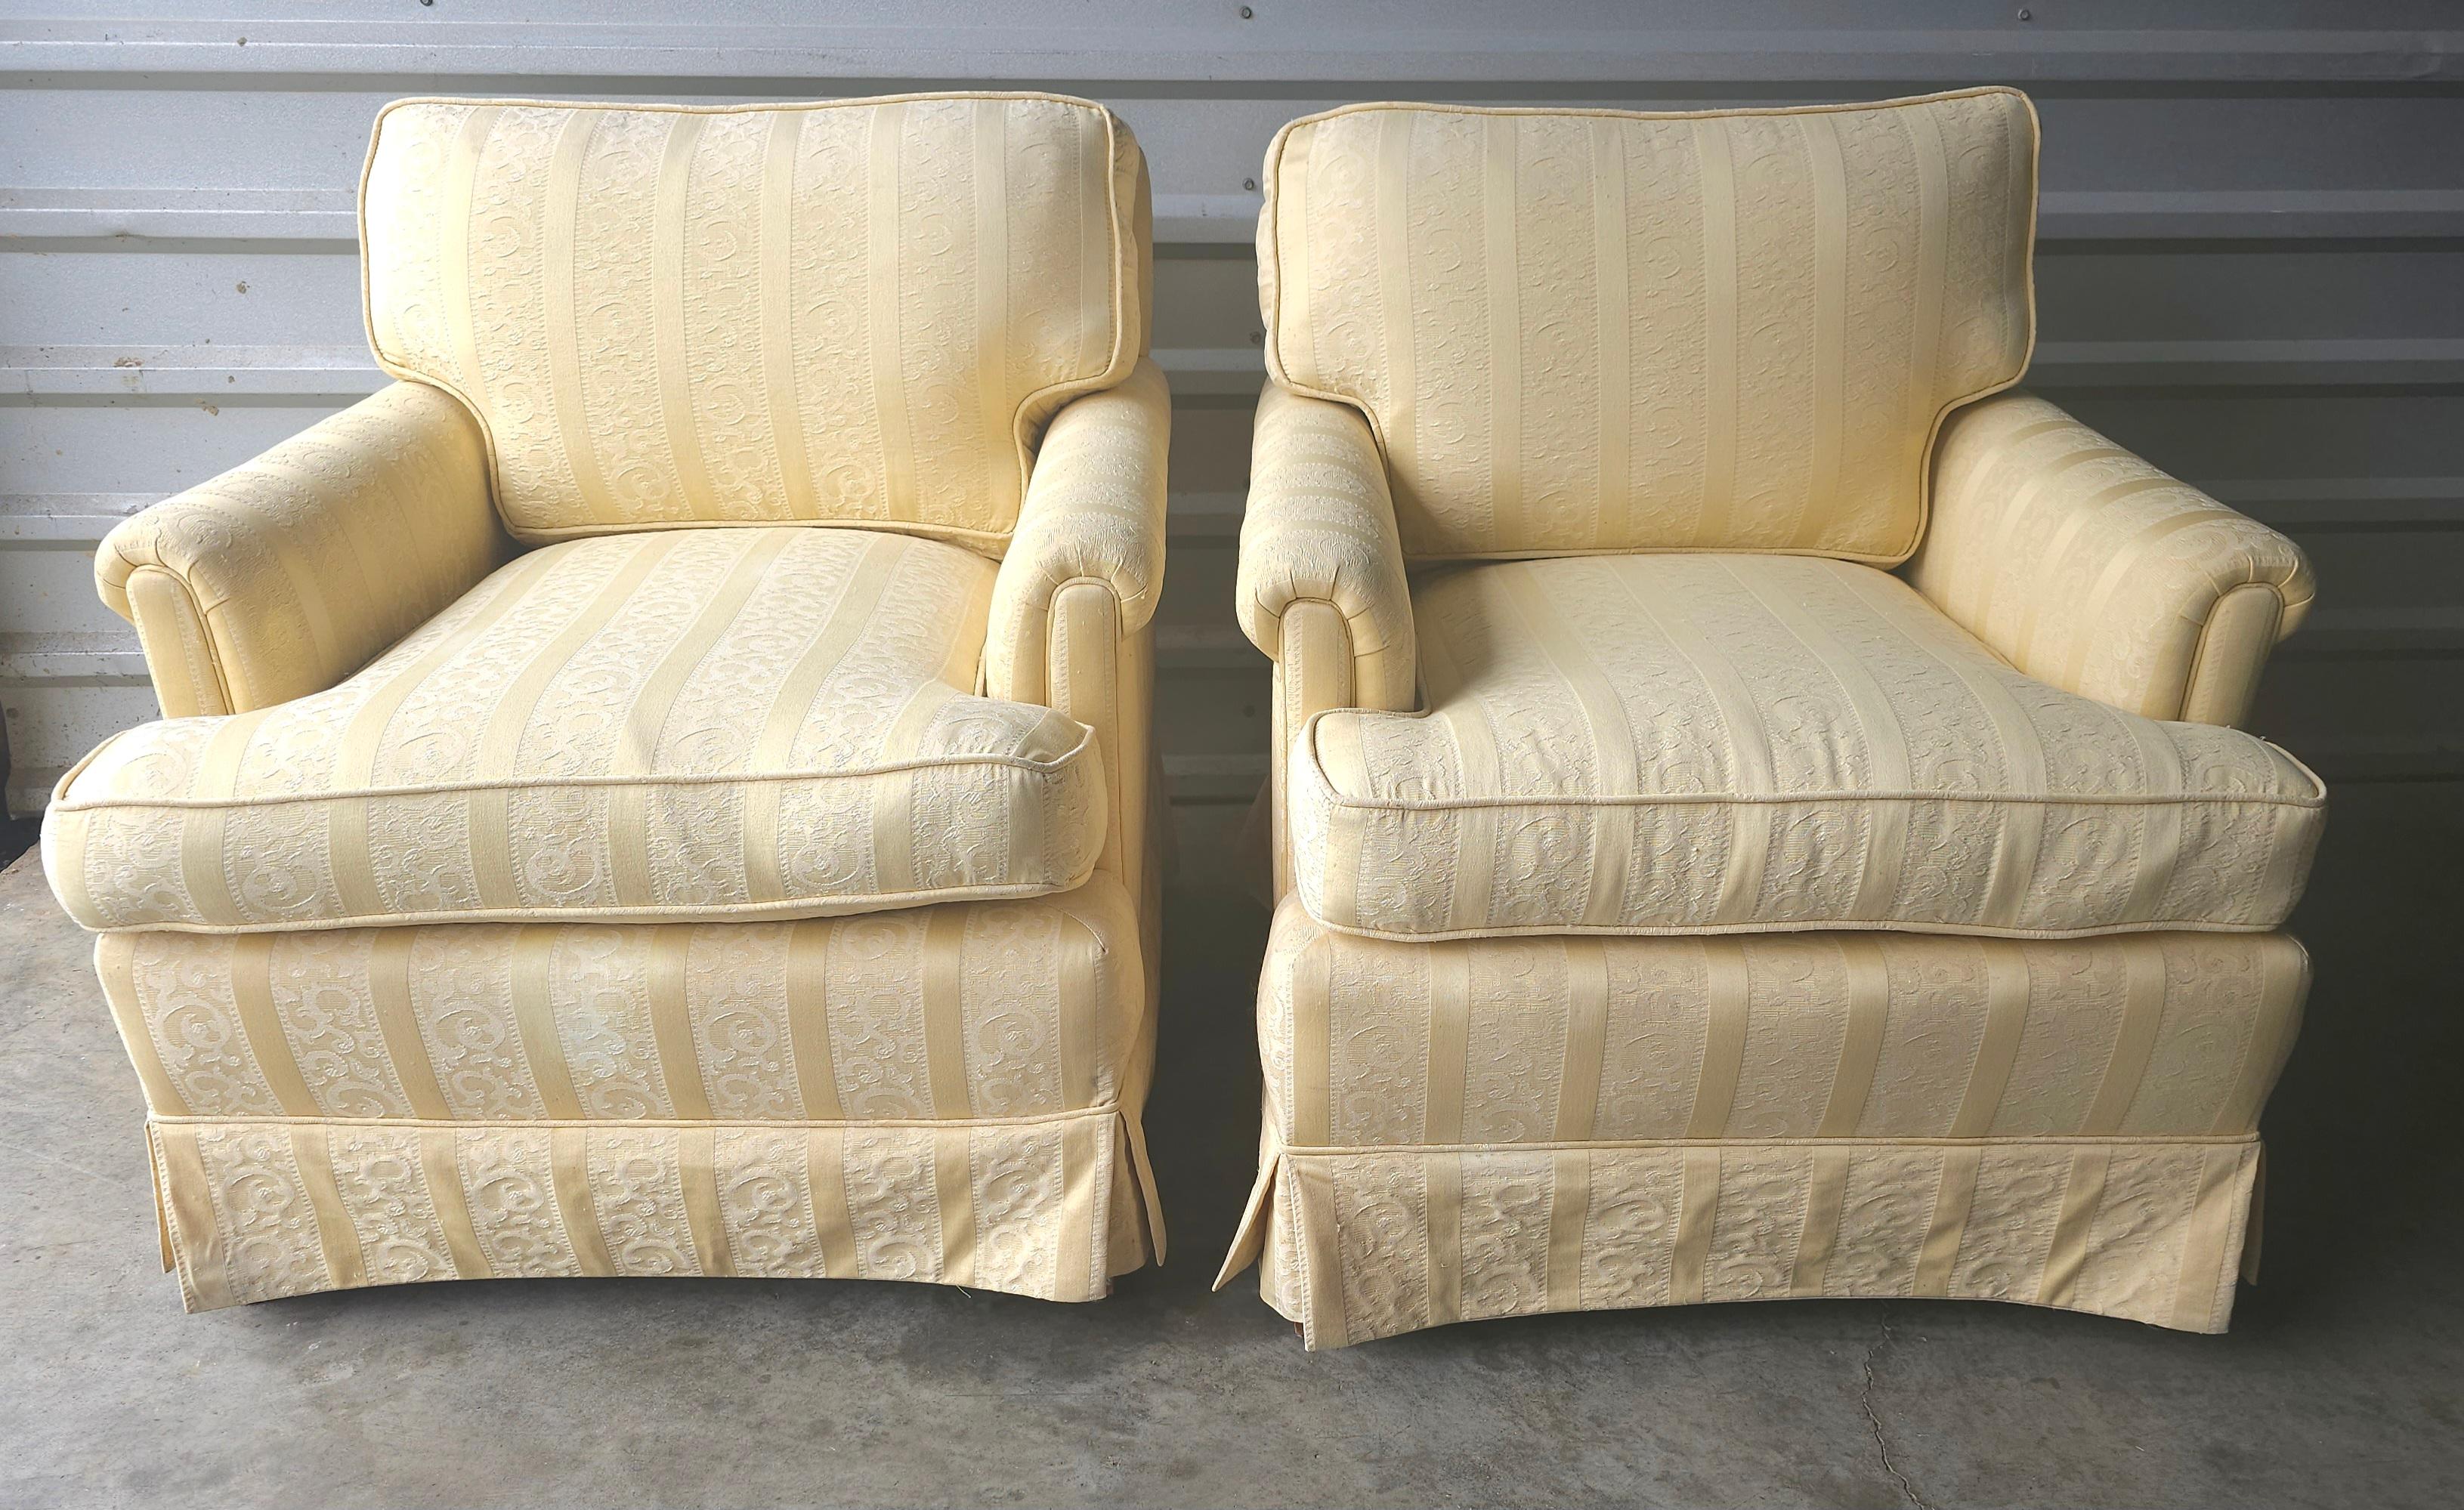 Pair of Mid 20th Century Yellow Upholstered Lounge Chairs For Sale 6